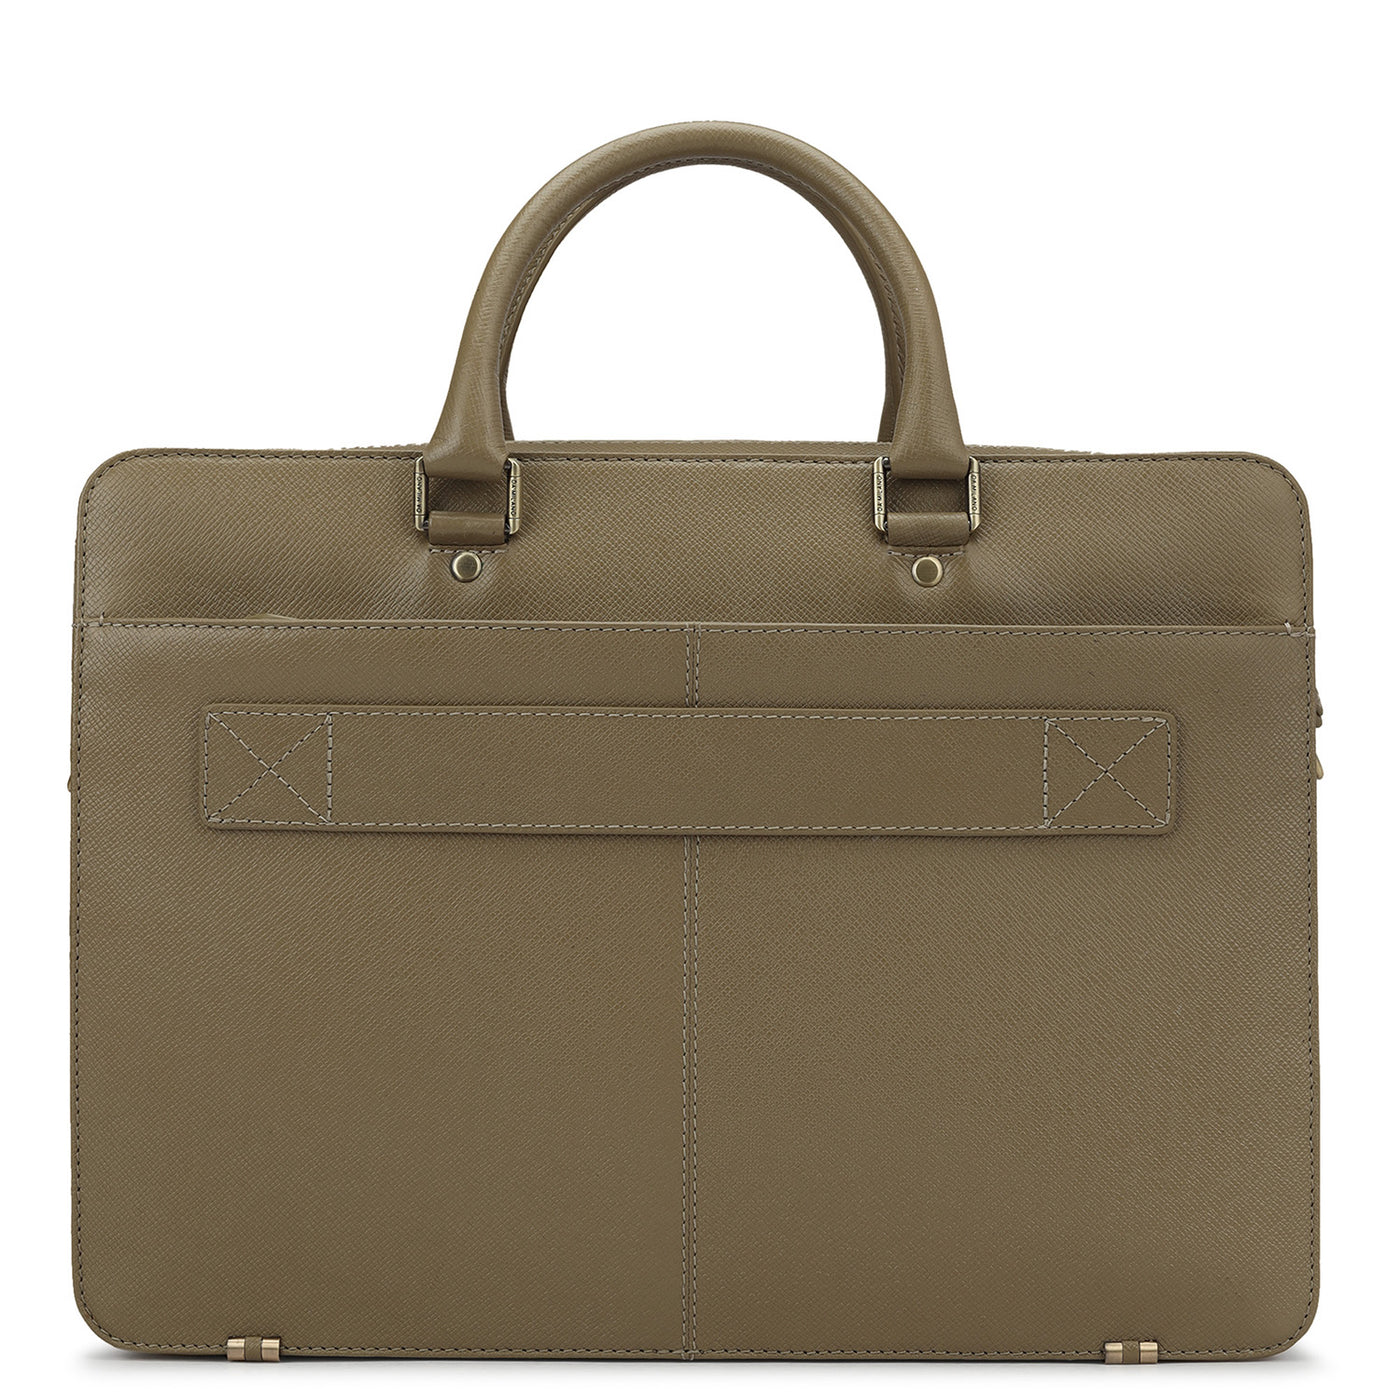 Turtle Franzy Leather Laptop Bag - Upto 15"